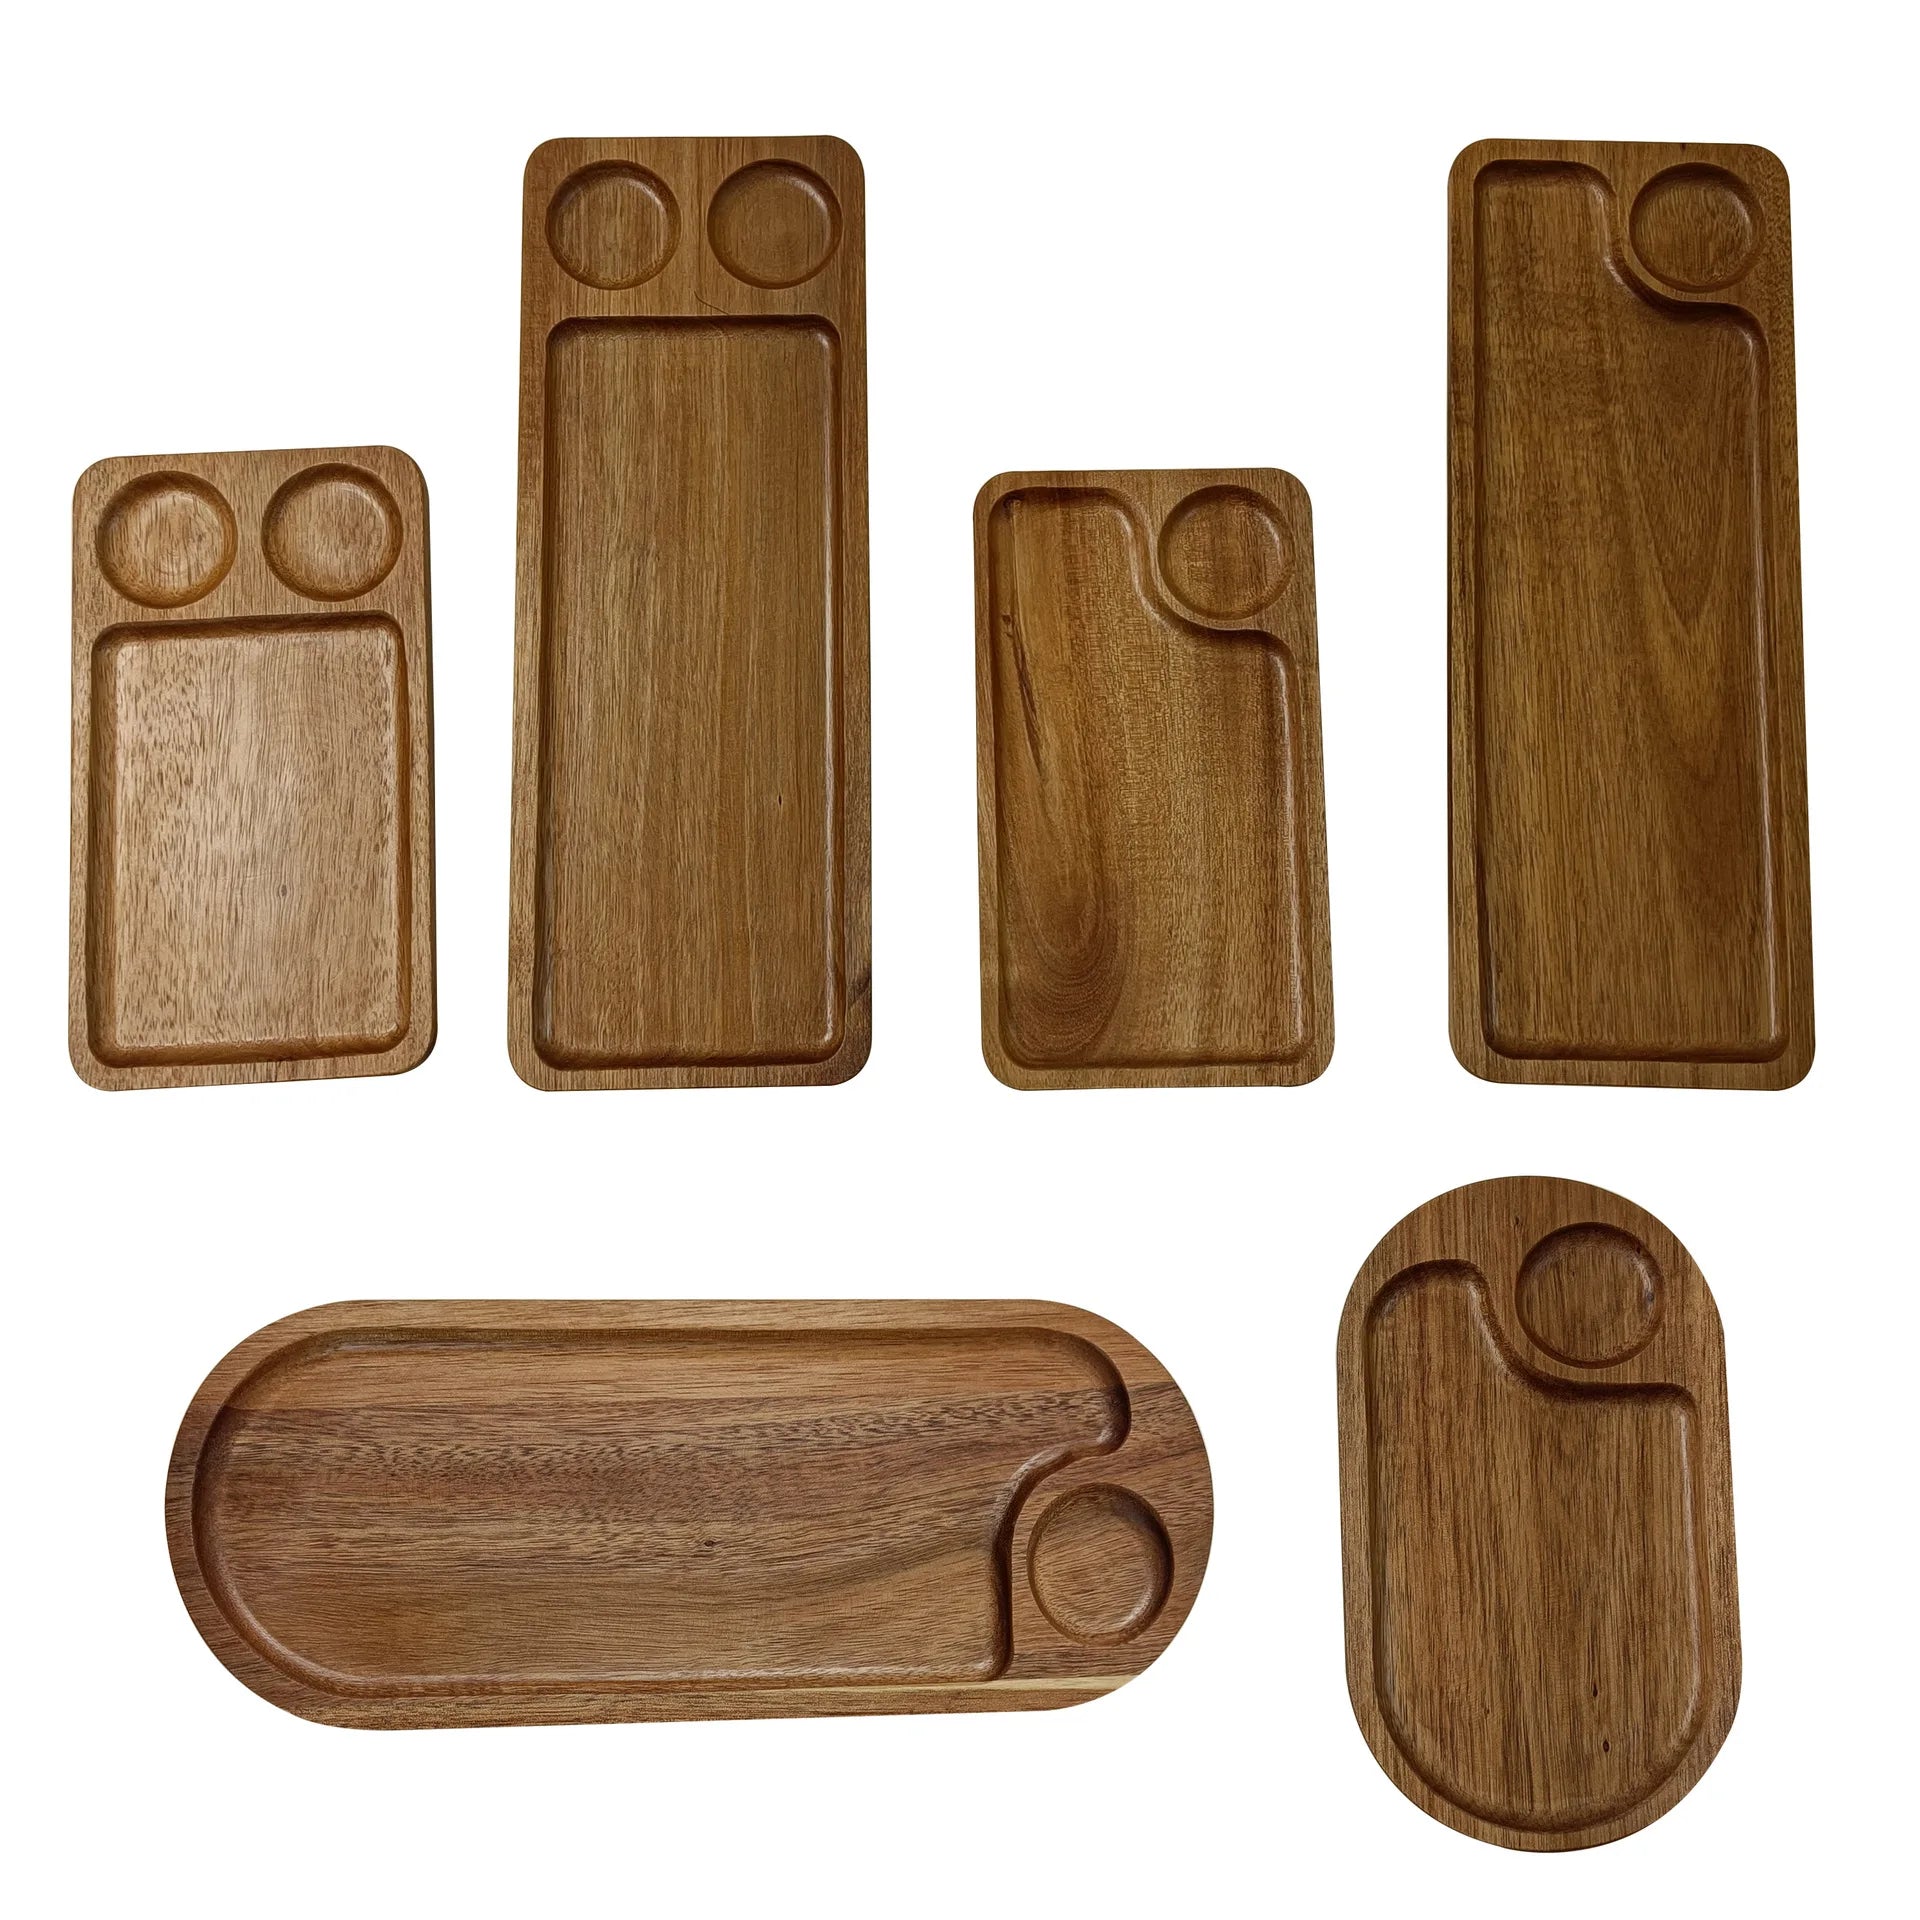 Creative wooden tray for household rectangular oval bread, dessert, fruit plate, cake, and meal plate restaurant trays